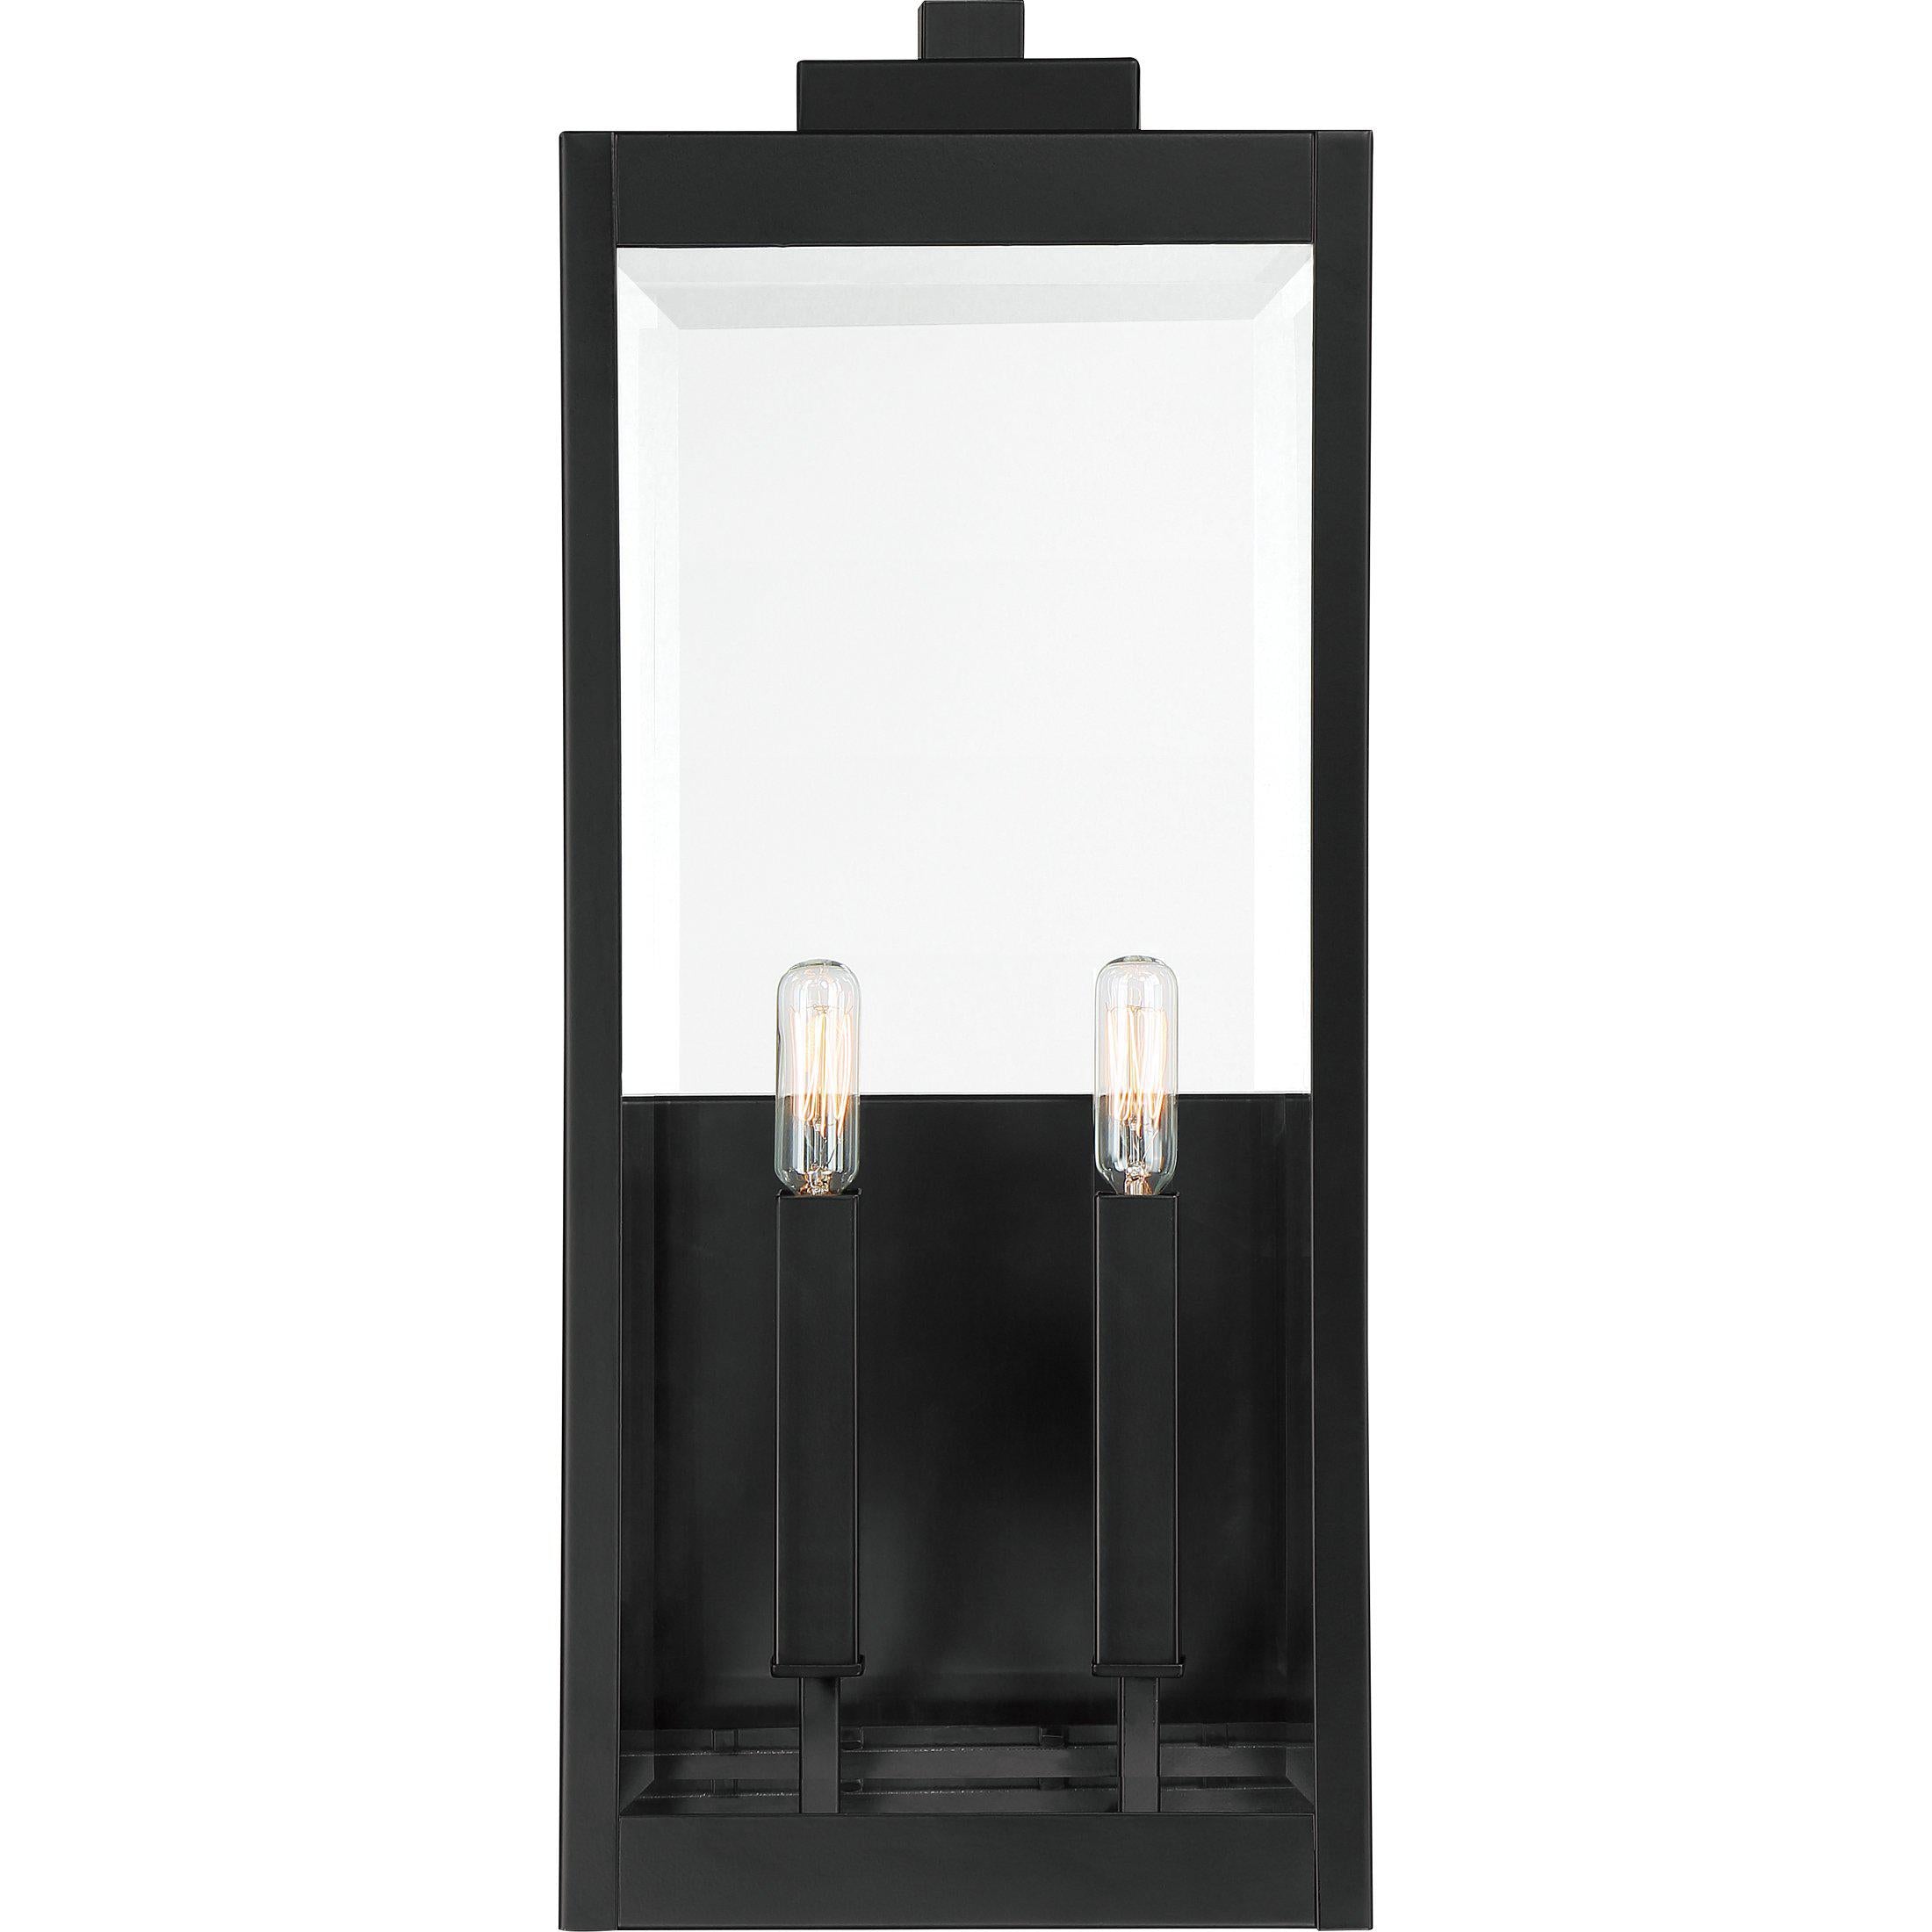 Quoizel  Westover Outdoor Lantern, XL Outdoor l Wall Quoizel   